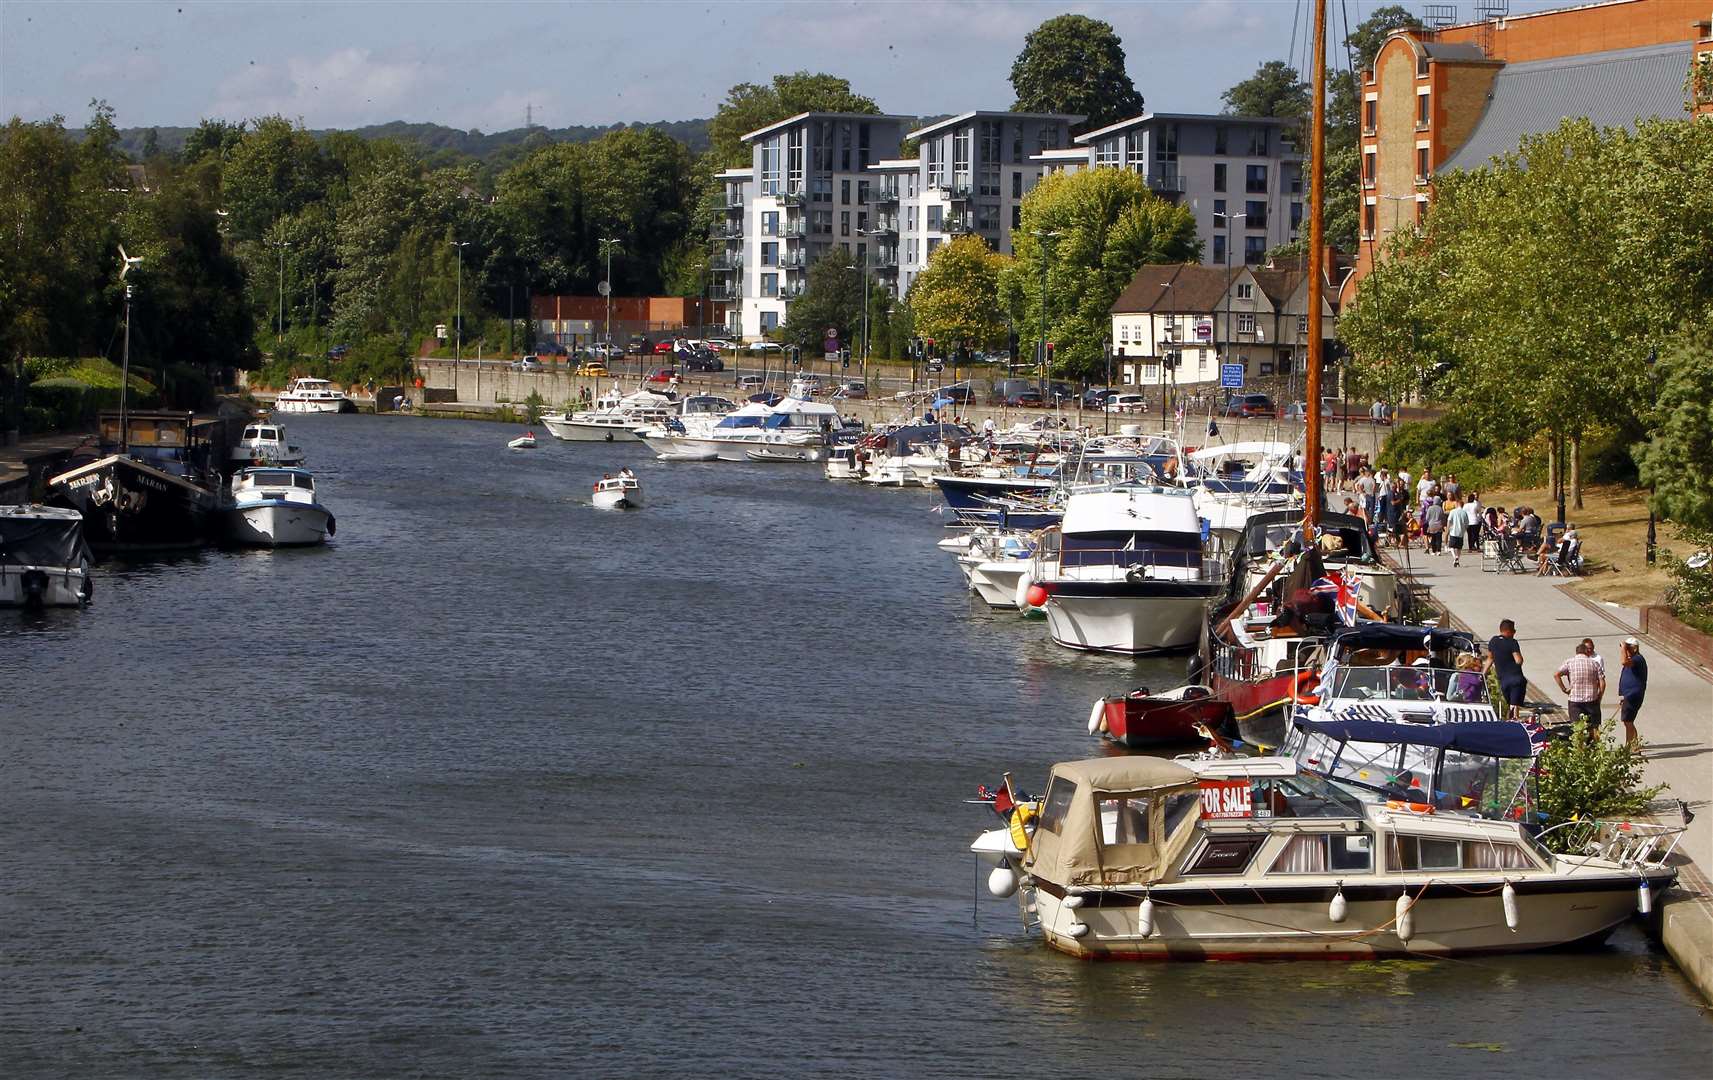 The River Medway in Maidstone: what side you were born on determines if you are a Man (or Maid) of Kent or a Kentish Man or Maid